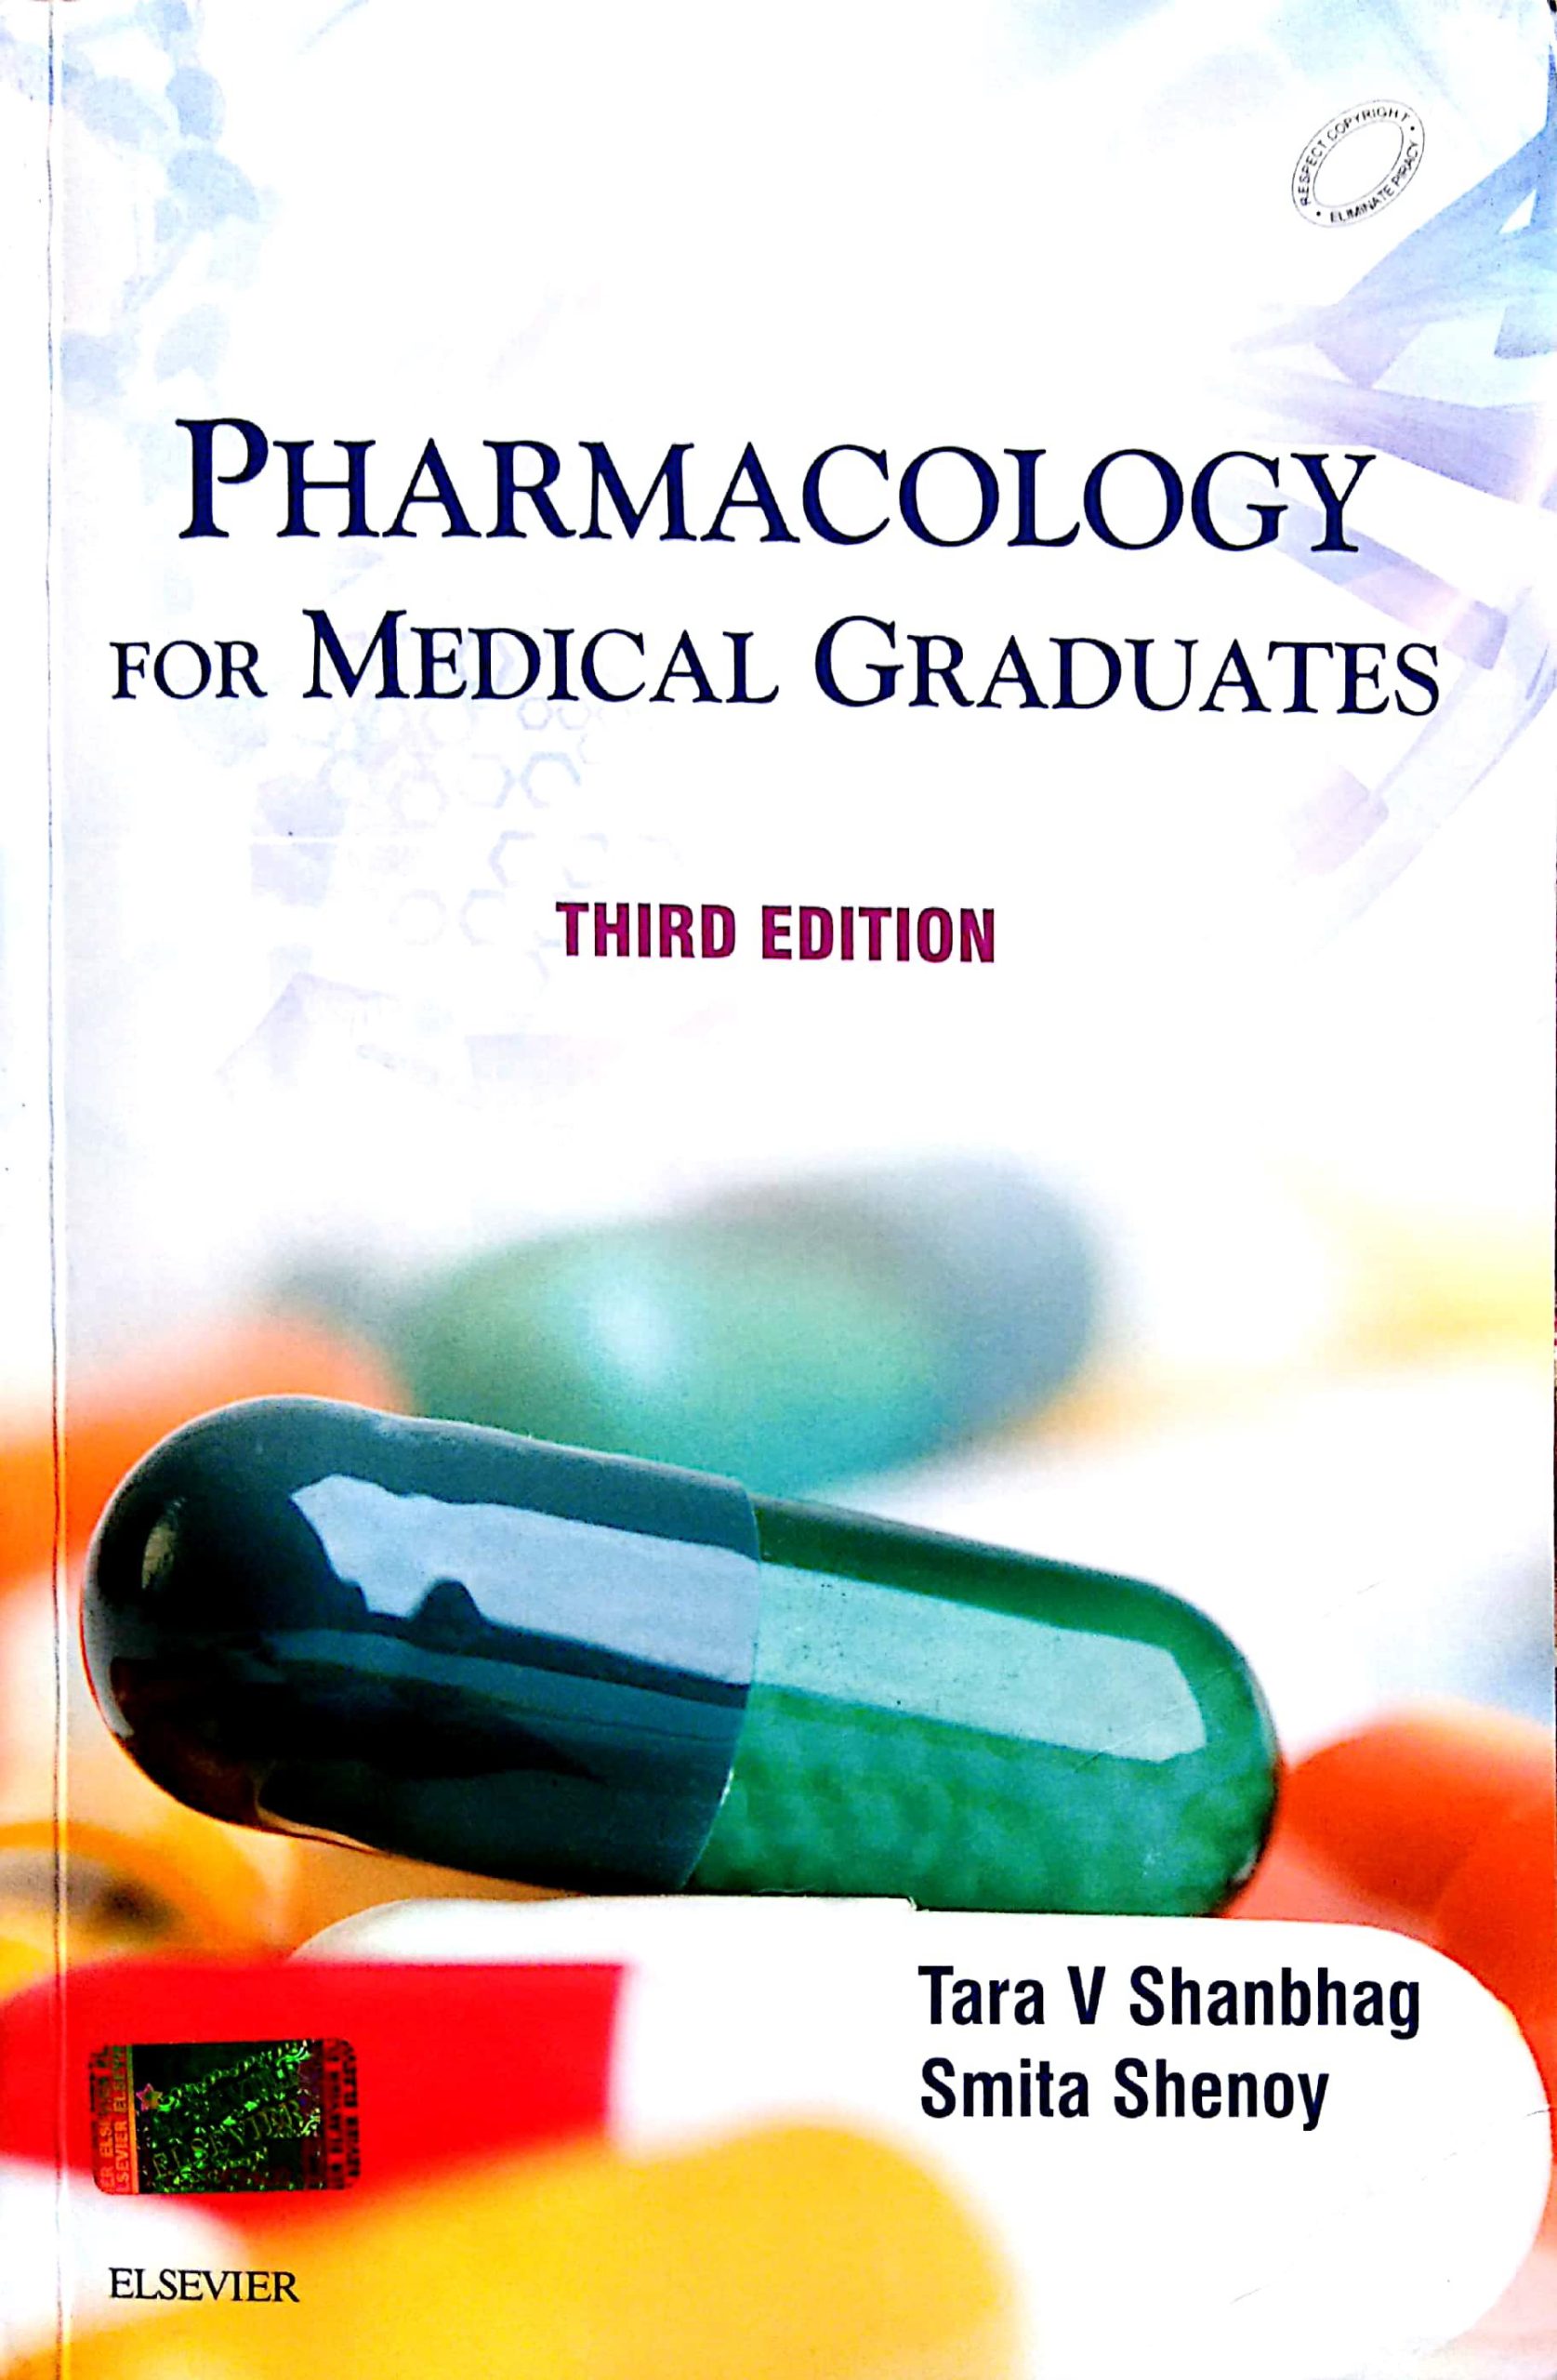 Shanbhag Pharmacology for Medical Graduates-3rd Edition pdf book free download